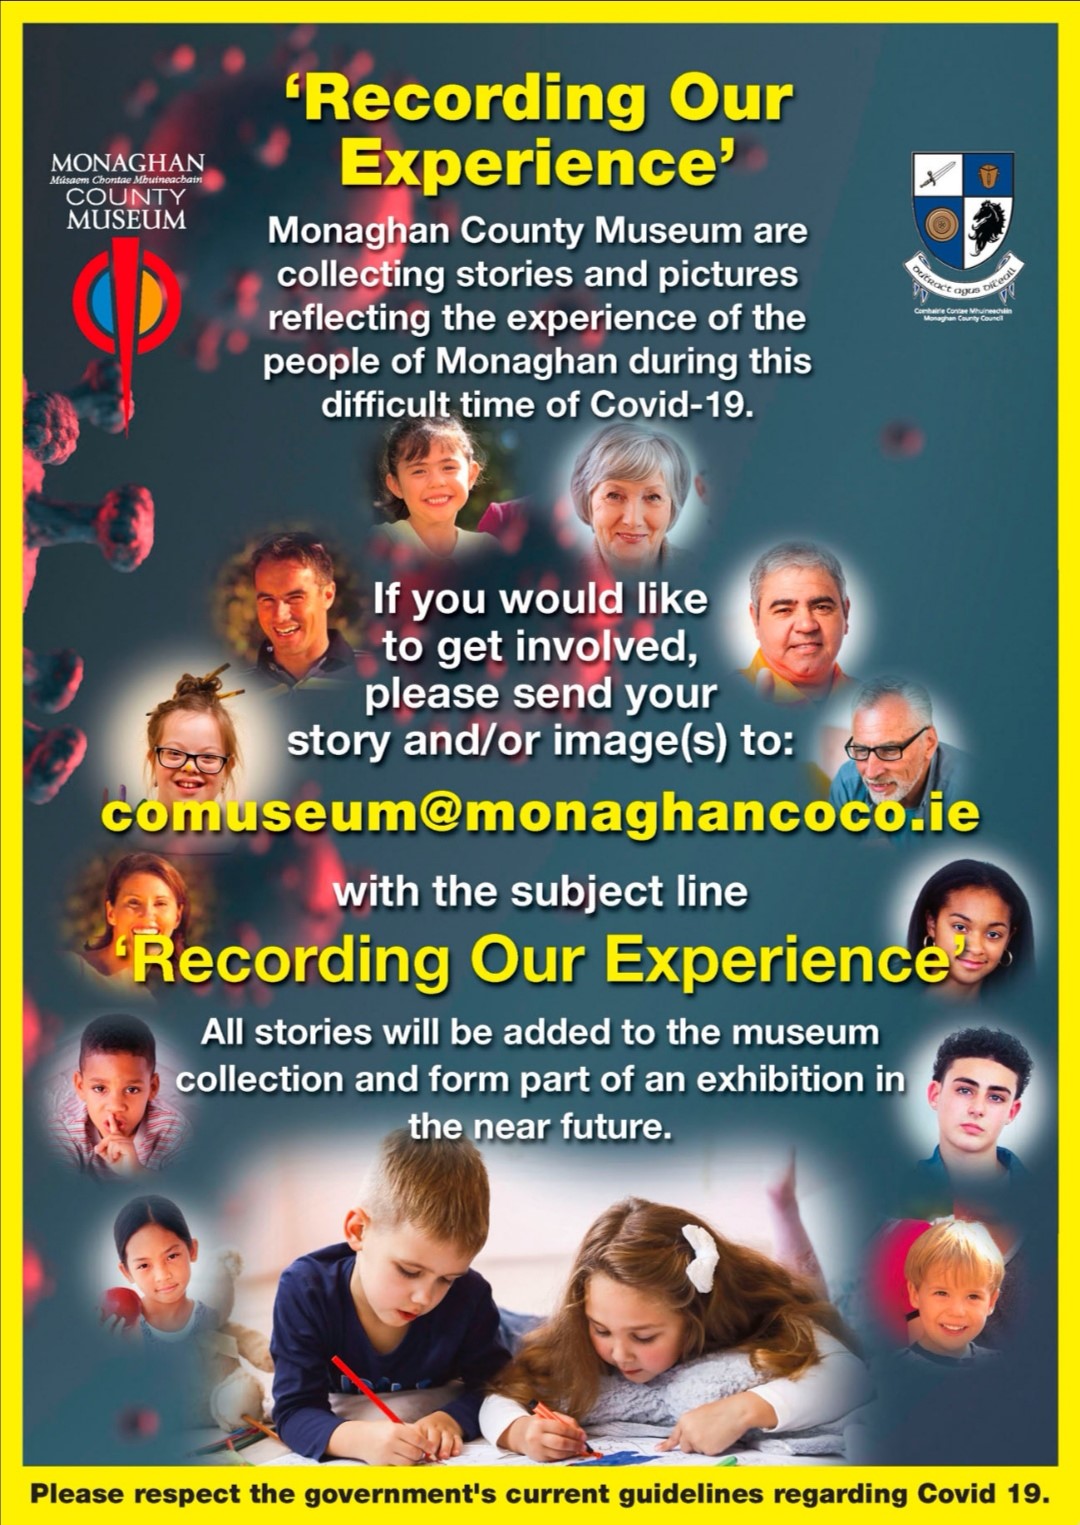 Monaghan County Museum wants to collect your experiences and stories about the Covid 19 Pandemic